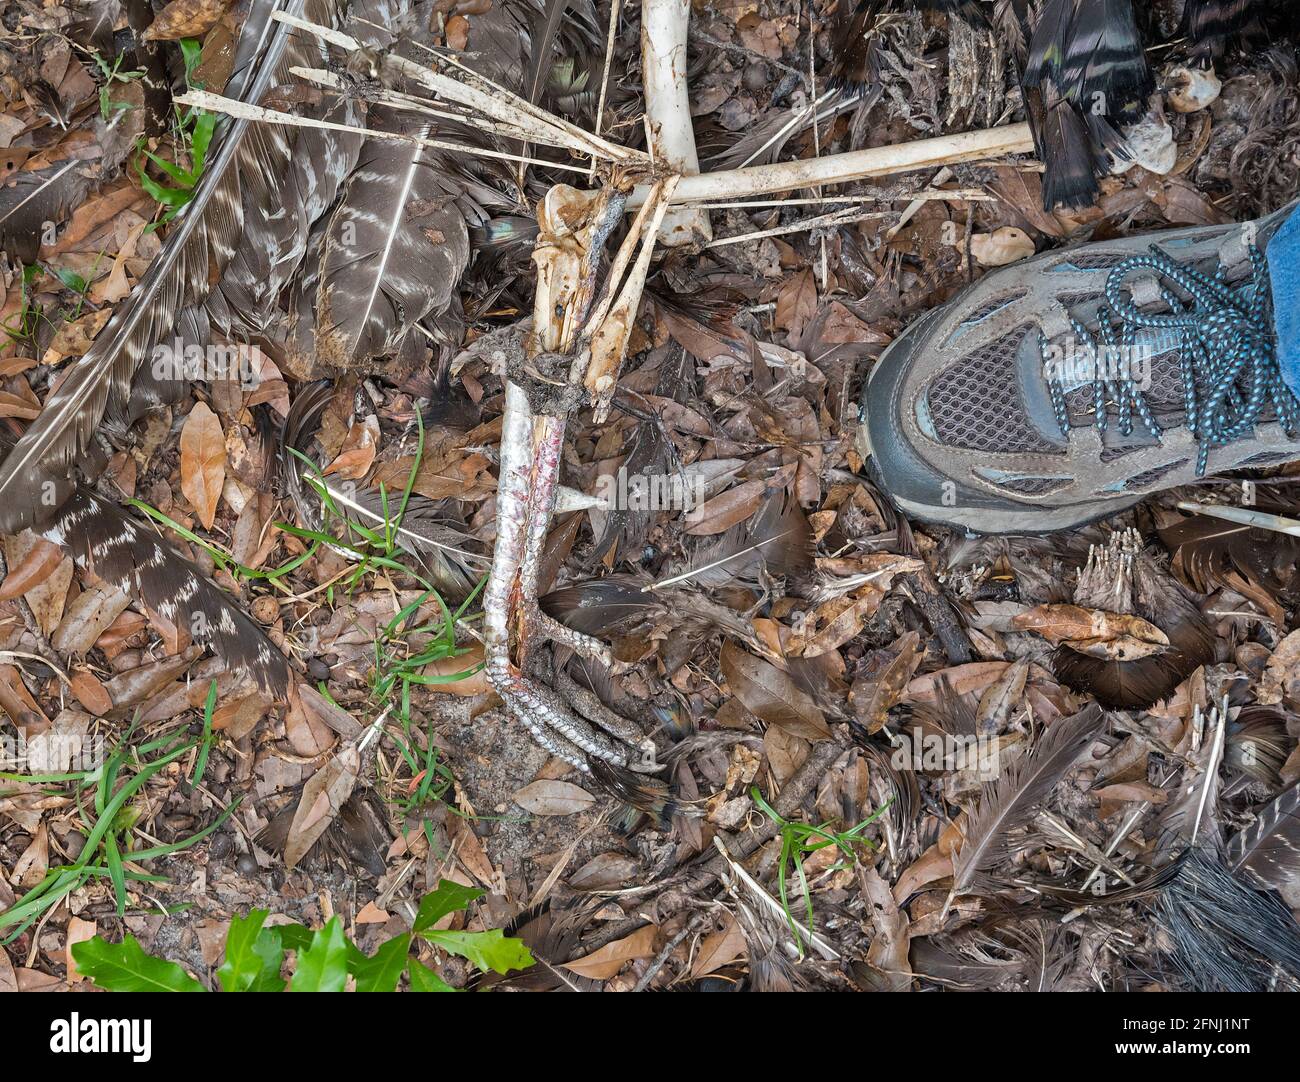 Remains of a wild turkey in a wooded area of North Florida. Stock Photo